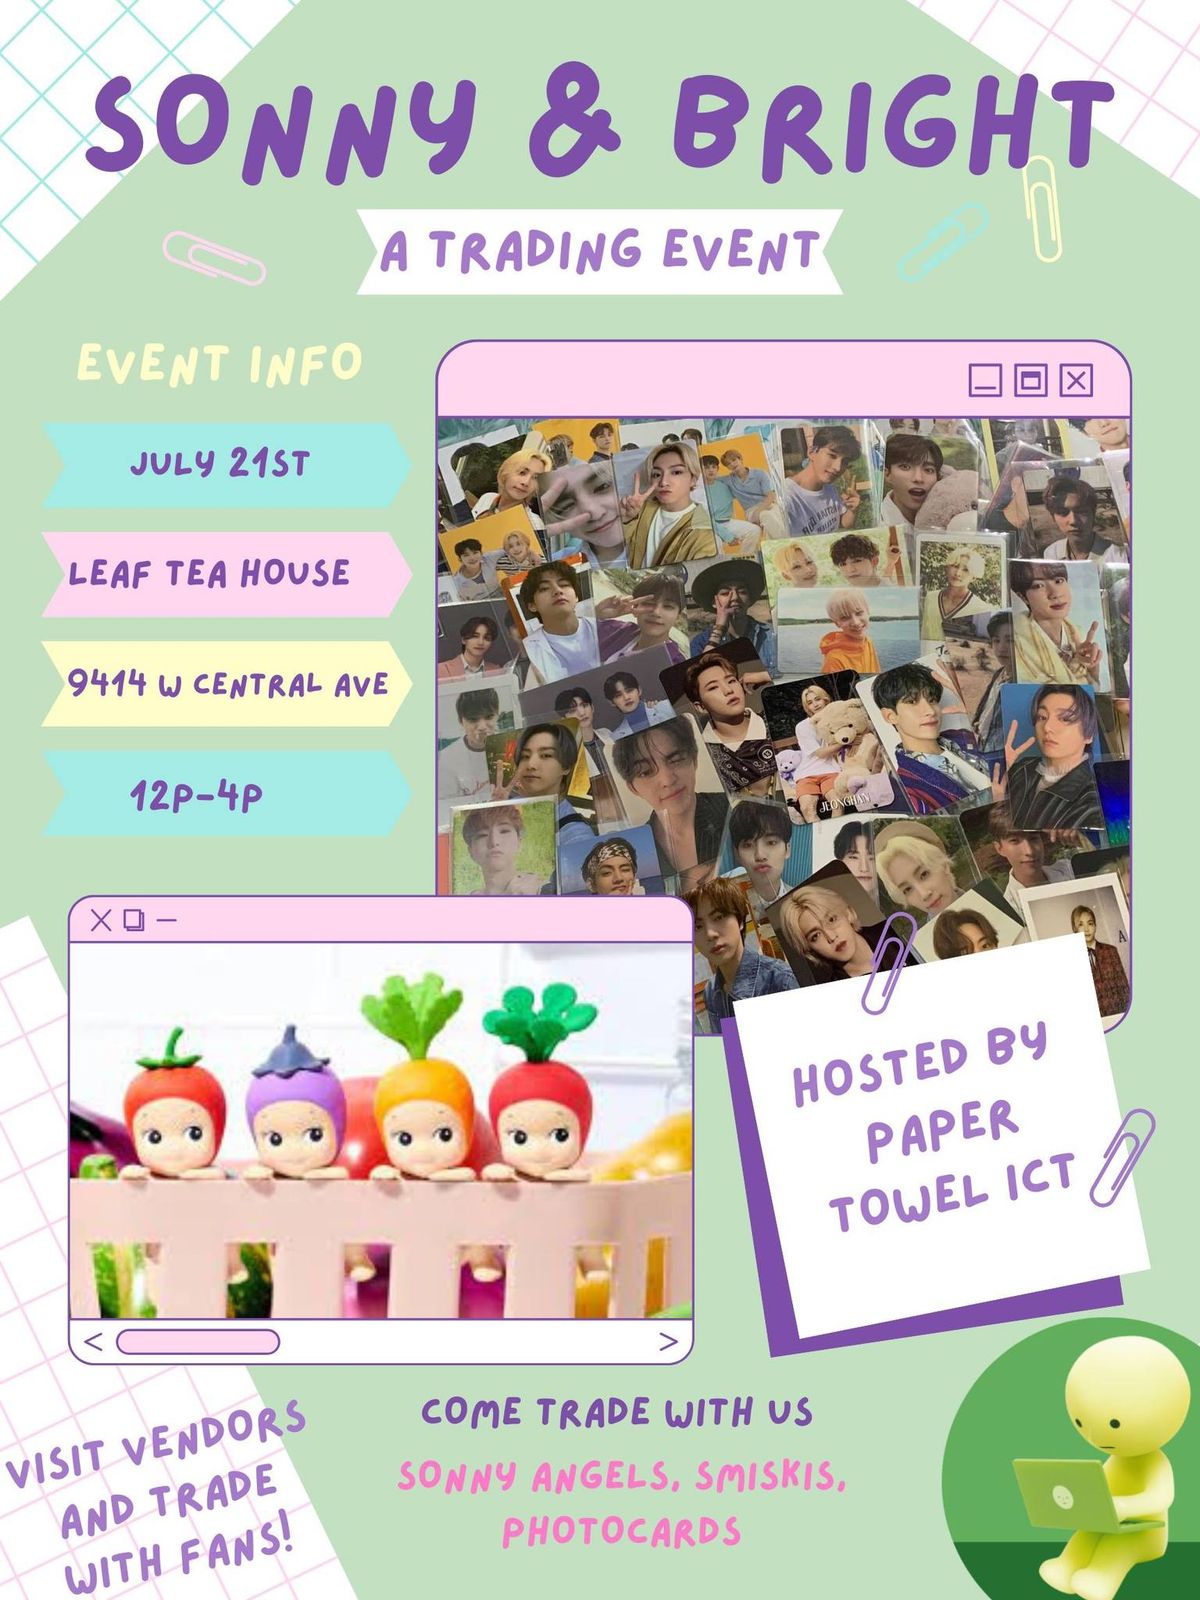 Sonny & Bright Trading Event